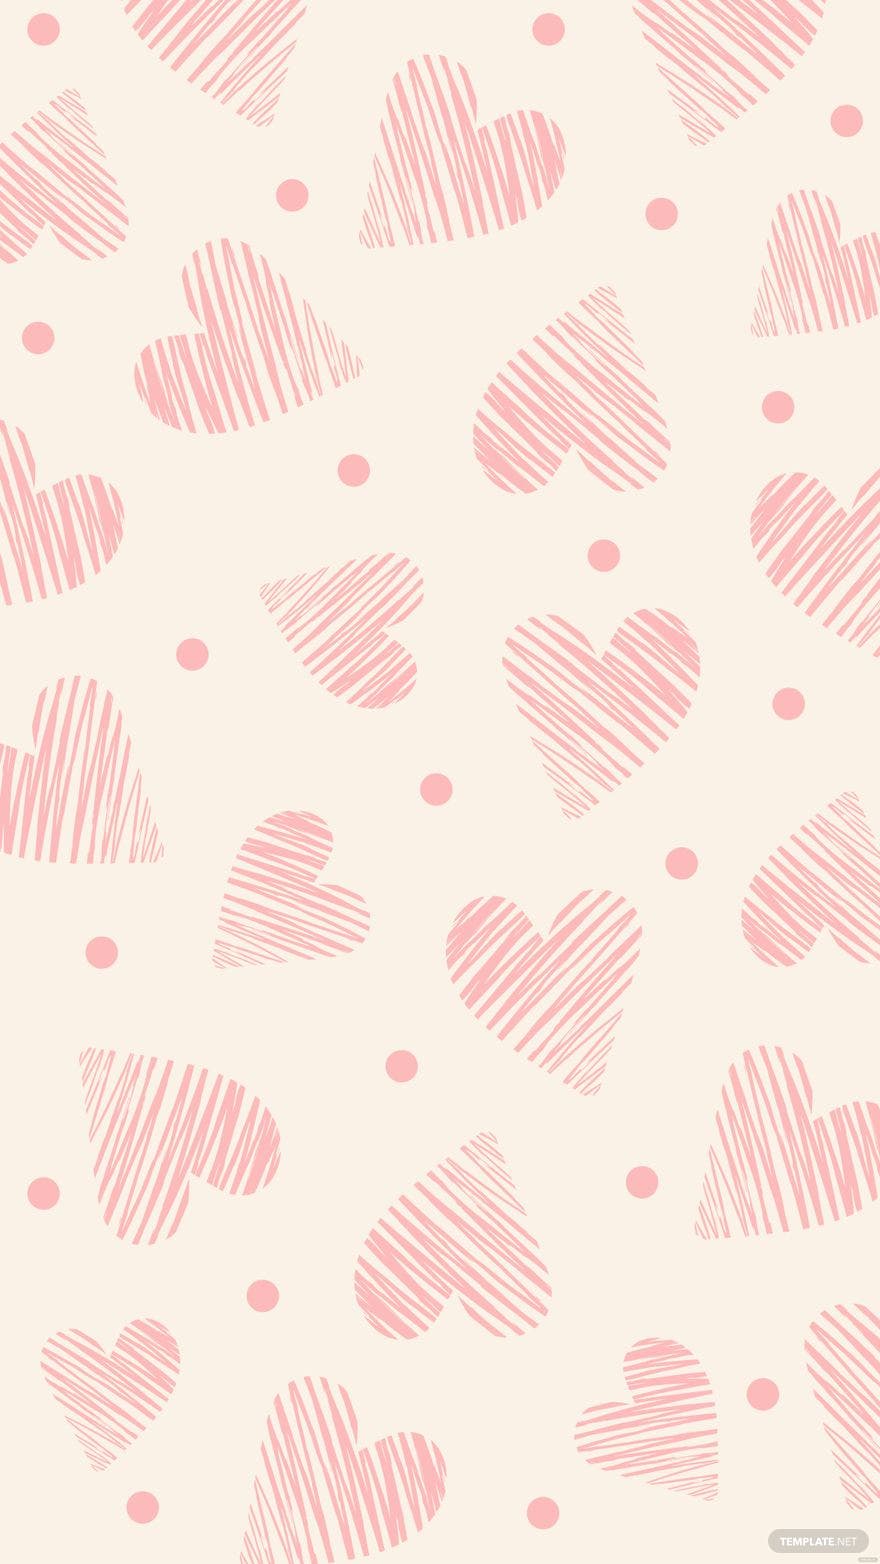 This is a cute pattern background image - Pastel pink, heart